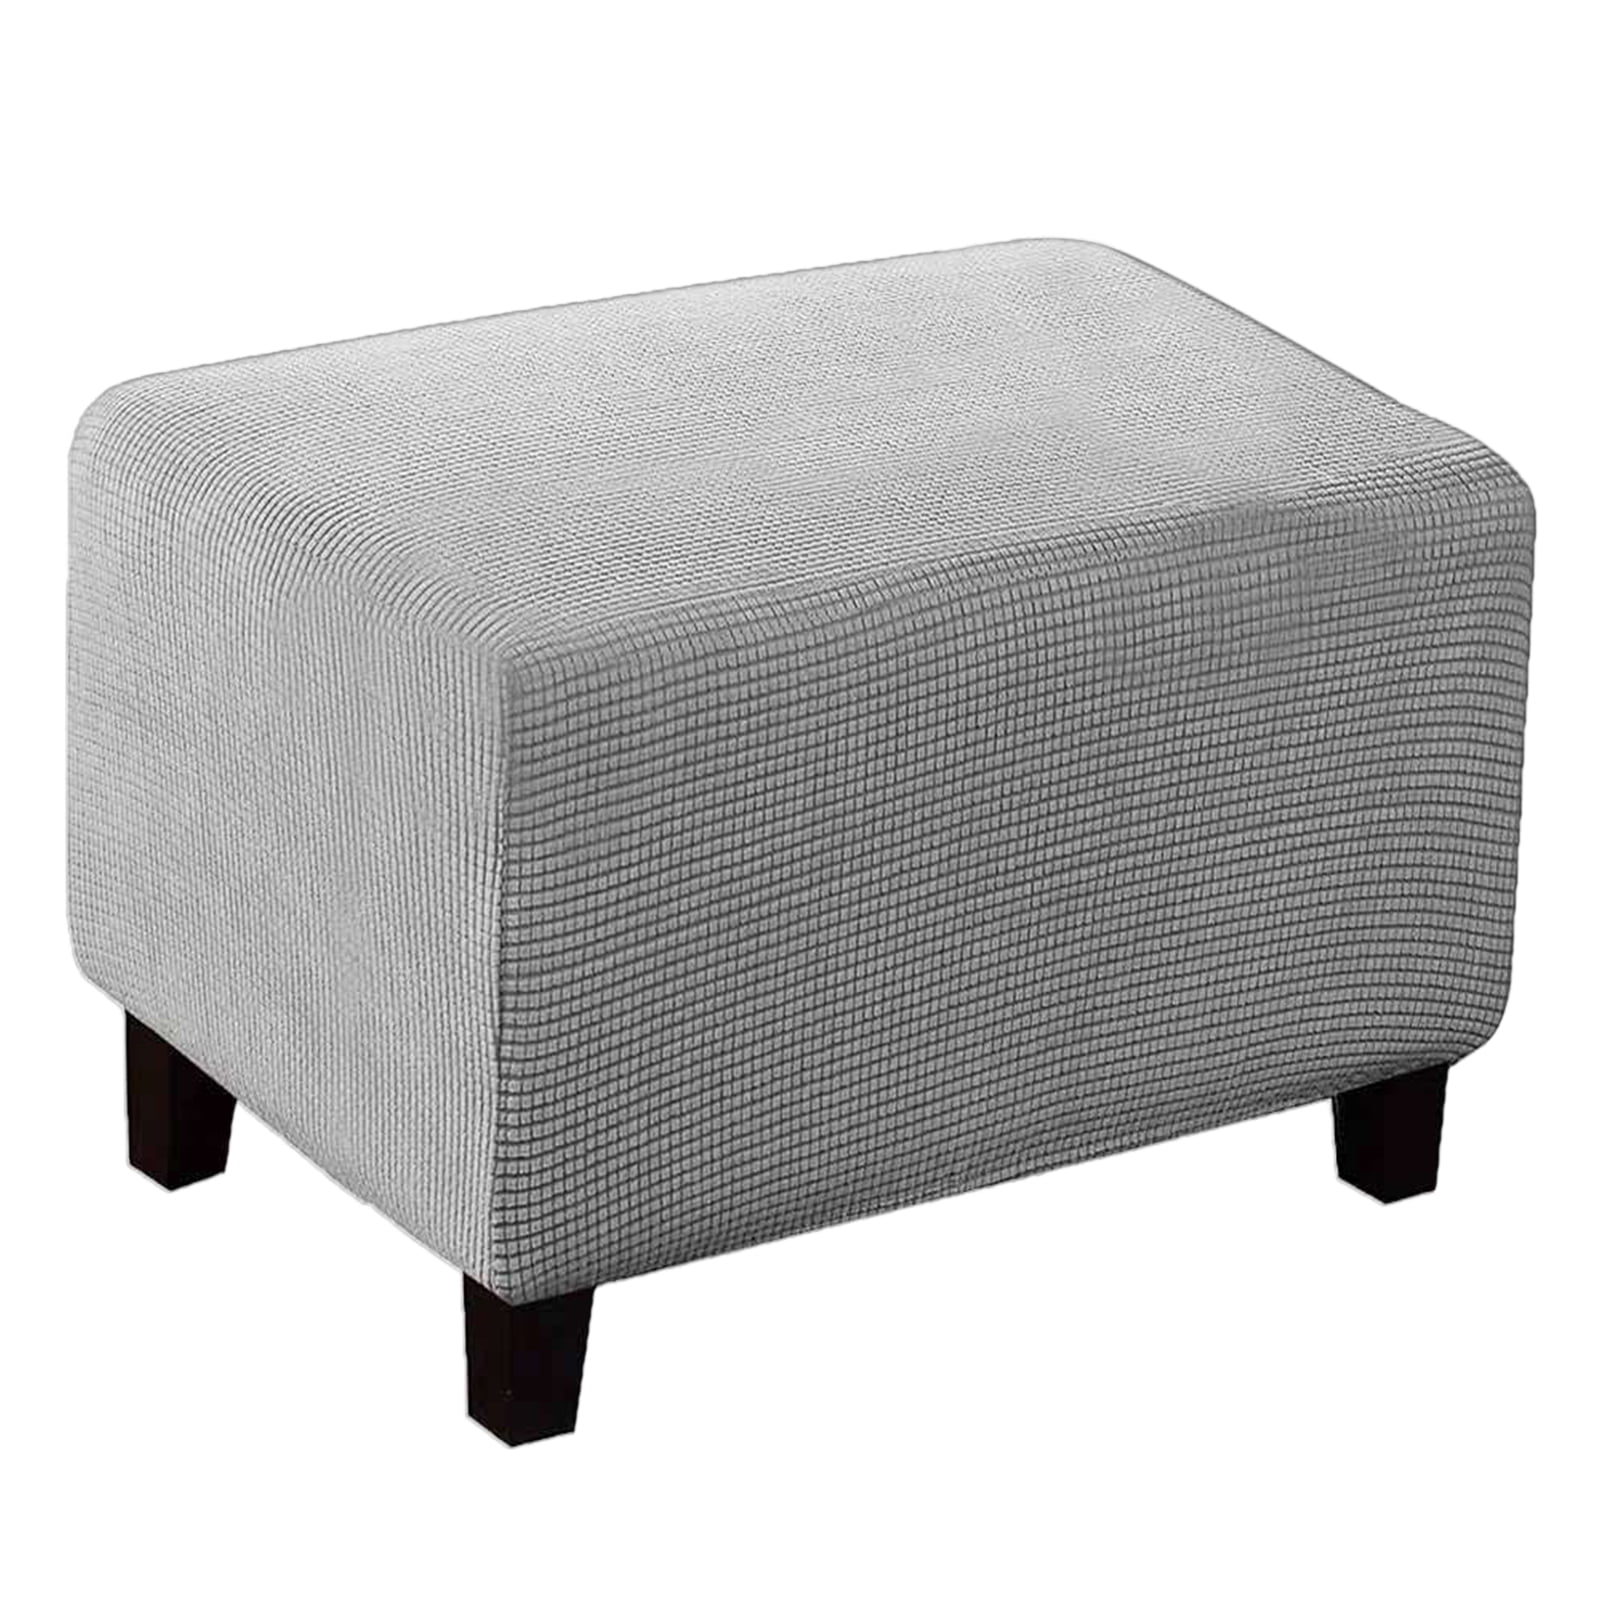 Details about   Ottoman Slipcover Living Room Footstool Cover Stretch Elastic Rectangle Soft